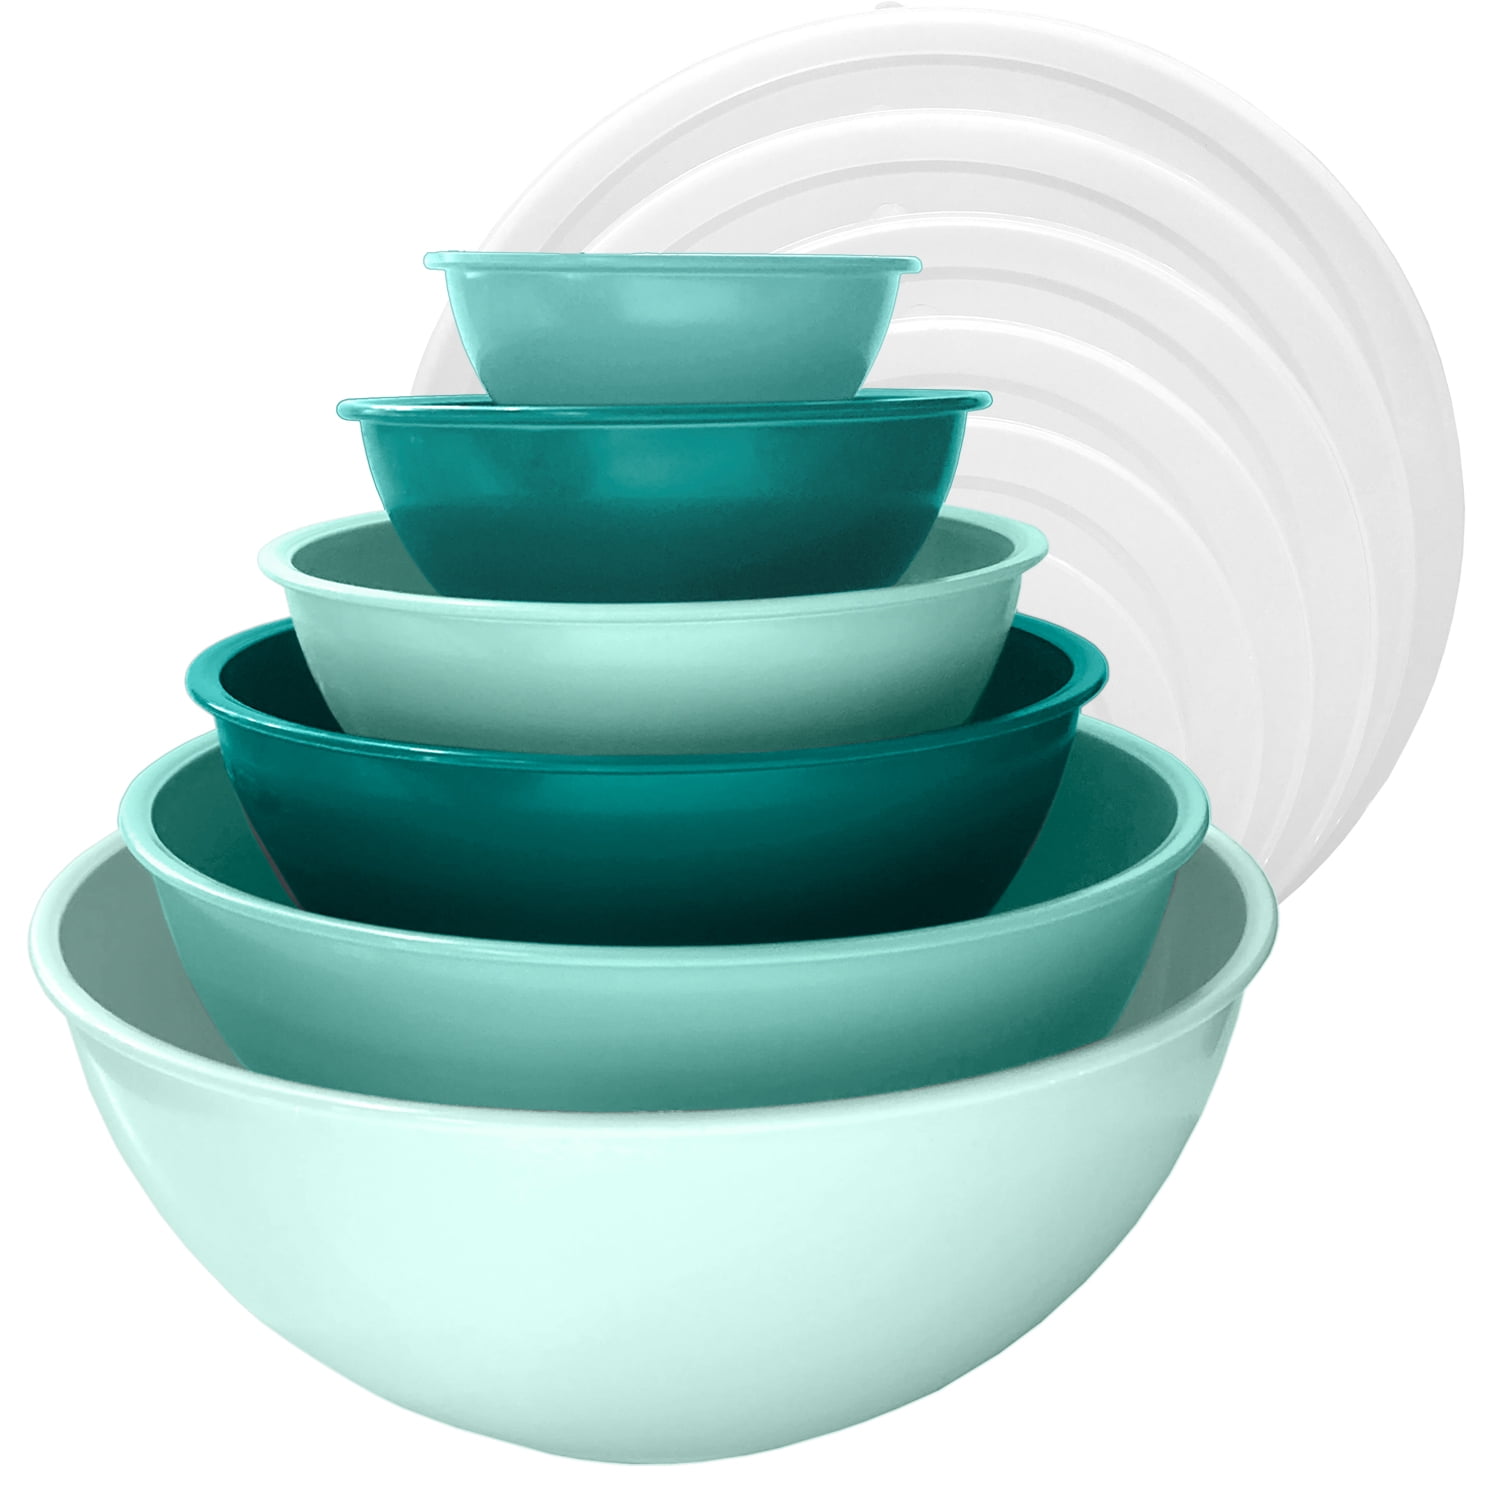 lok-osemile melamine mixing bowls with lids - 12 piece nesting bowls set 6  bowls and 6 lids, mixing bowl set (green ombre)